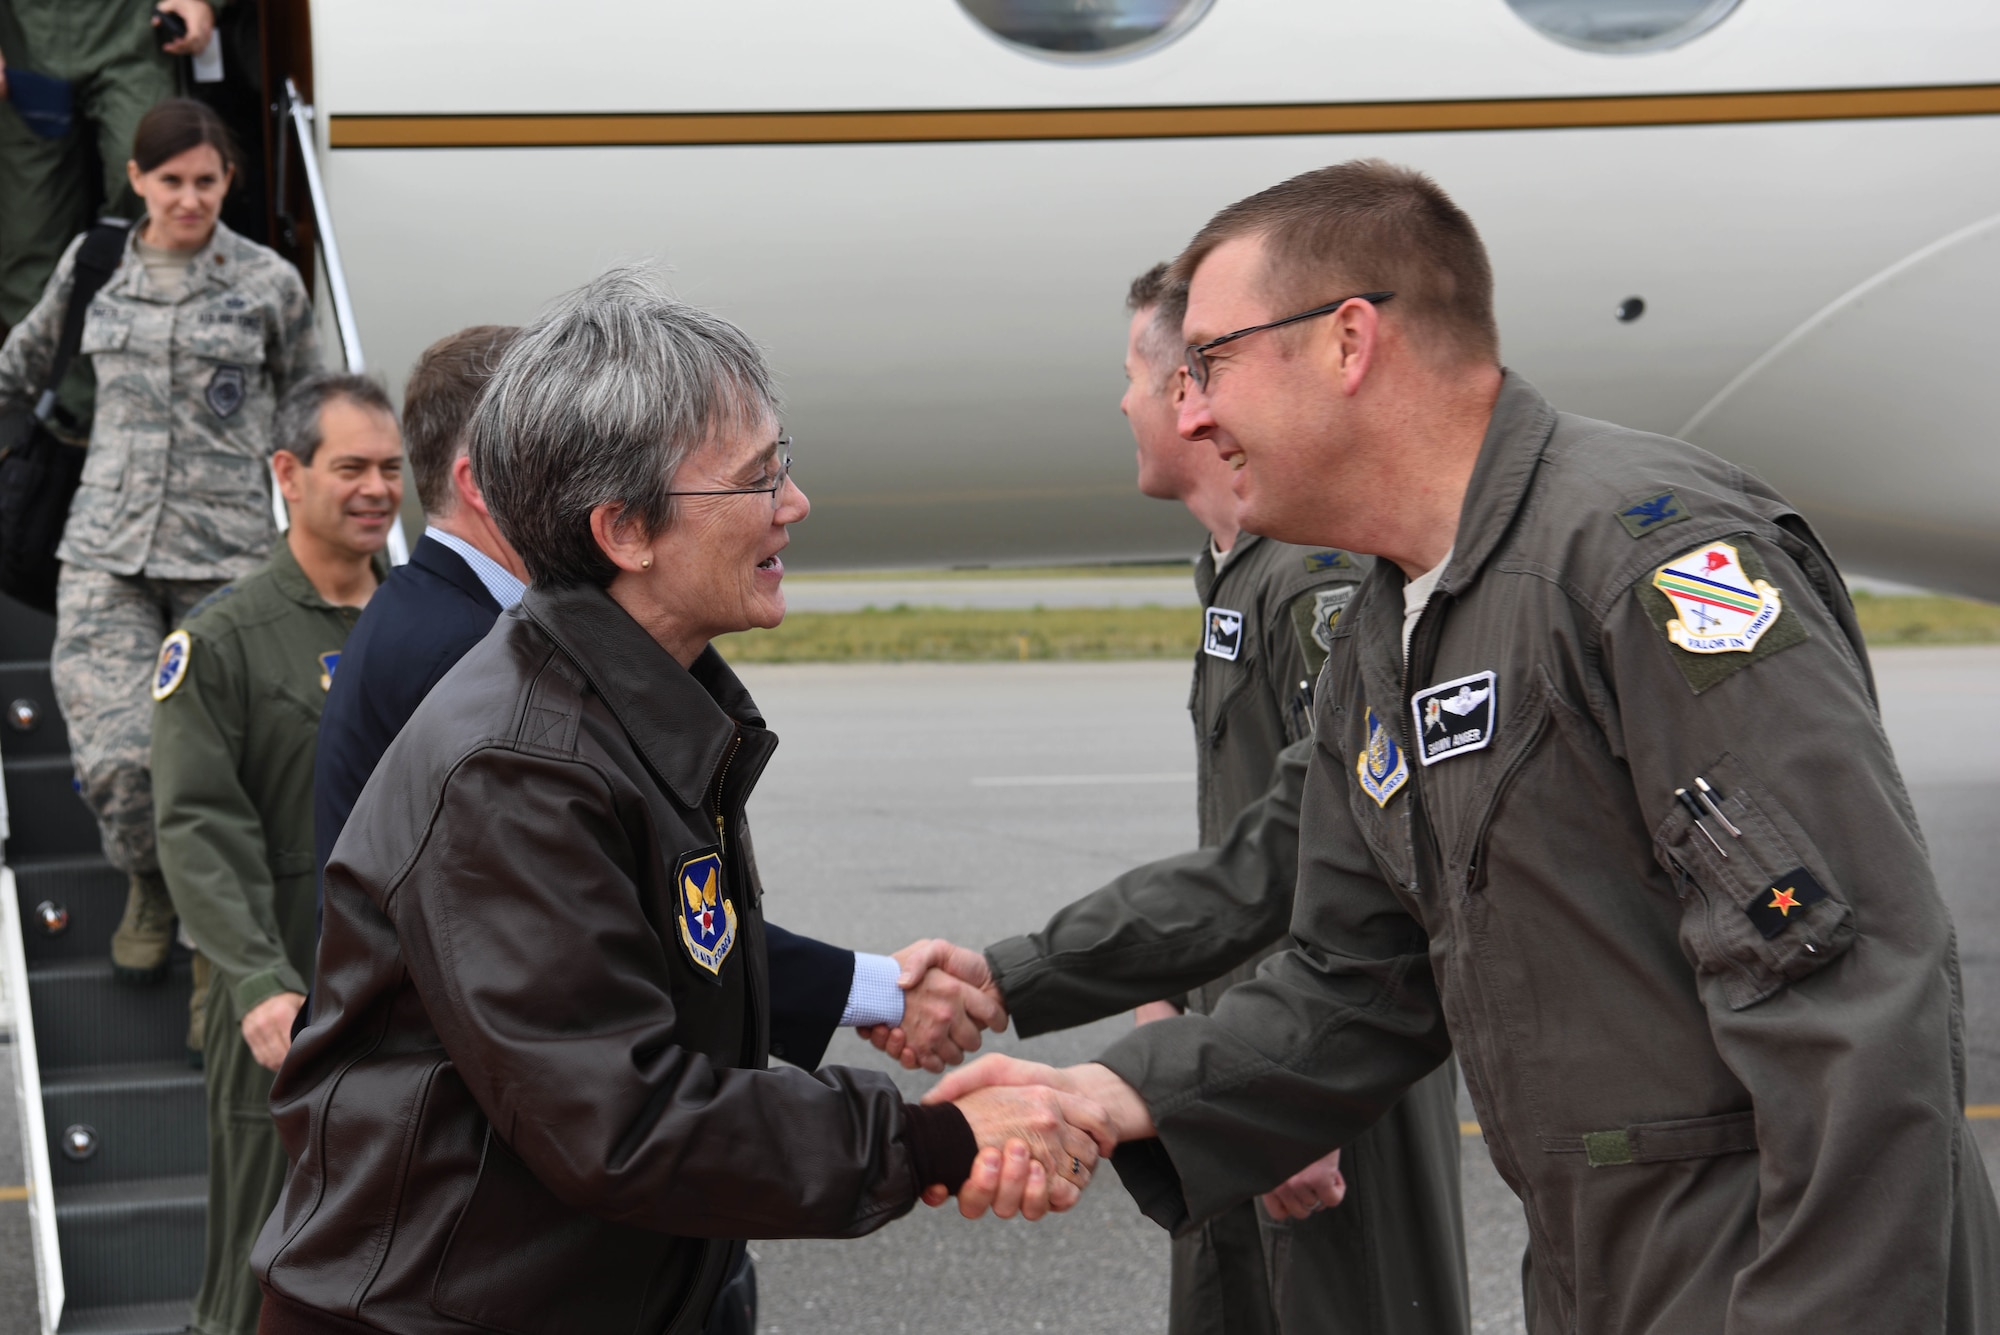 The Honorable Heather A. Wilson, the Secretary of the Air Force, is greeted by Col. Shawn E. Anger, the 354th Fighter Wing vice commander, Aug. 10, 2018 at Eielson Air Force Base, Alaska. Wilson graduated from the Air Force Academy in 1982 and served in the U.S. Air Force until 1989. (U.S. Air Force photo by Airman 1st Class Eric M. Fisher)